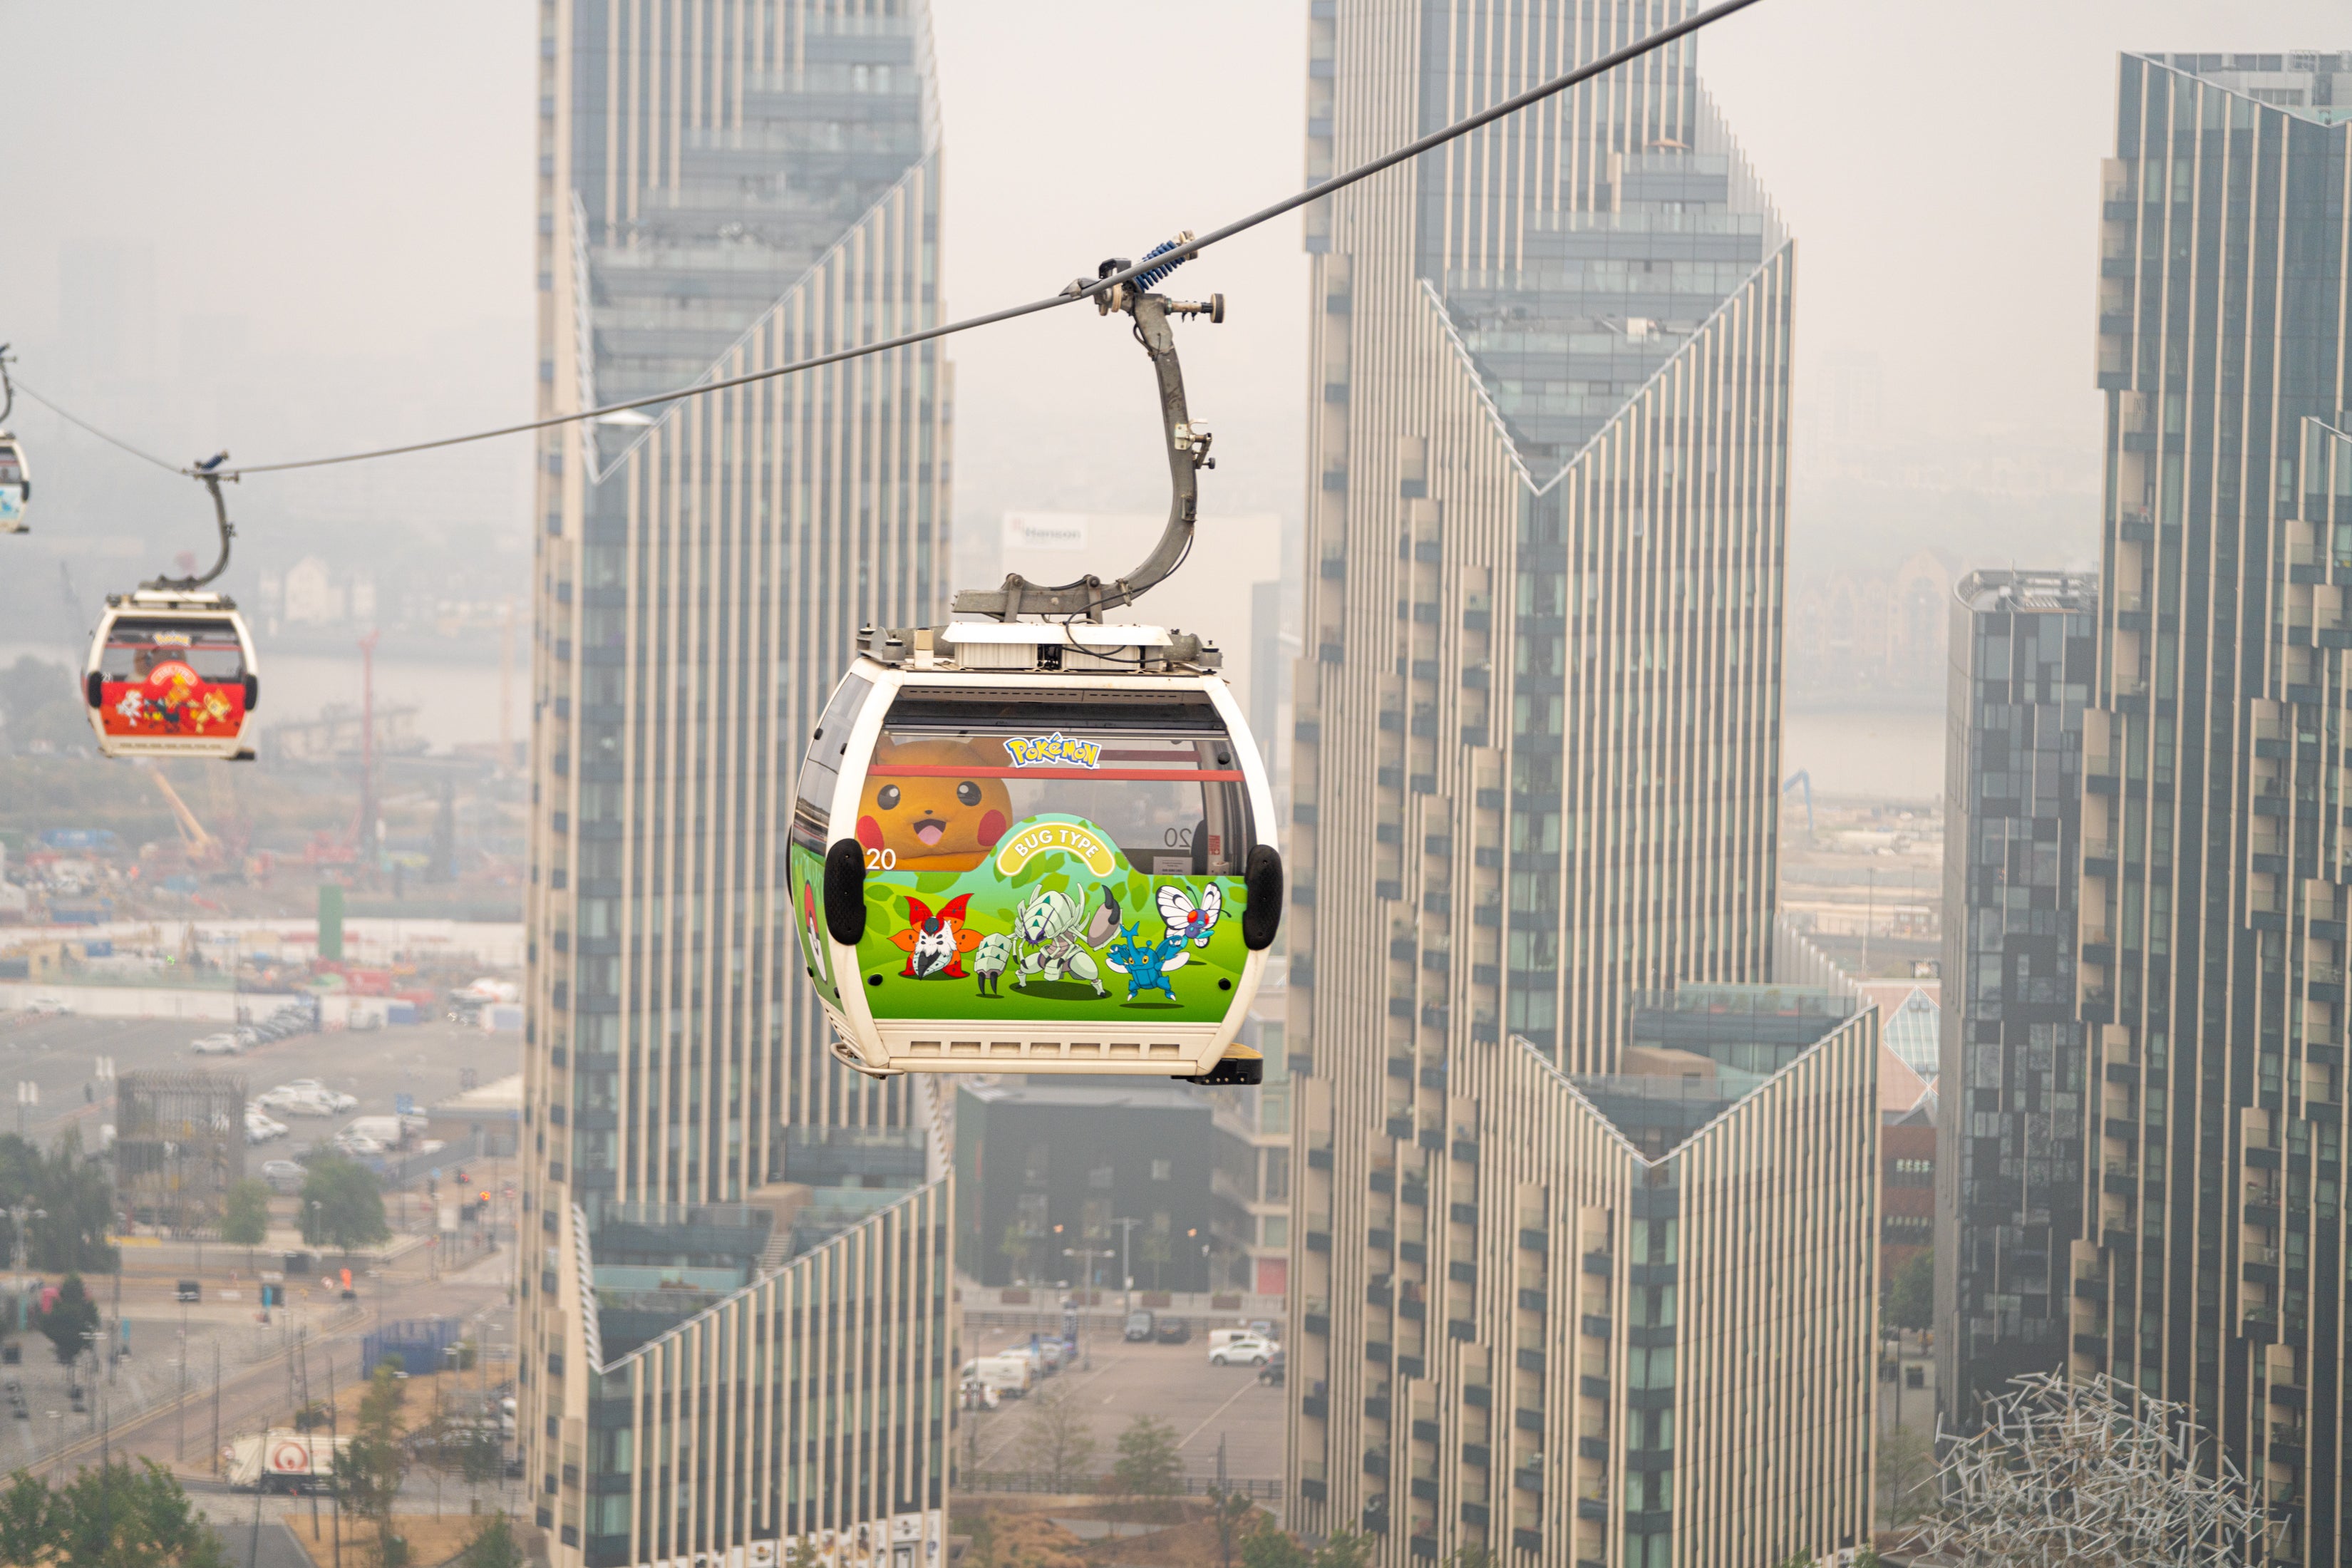 TfL cable cars have been decorated in celebration of the event (The Pokemon Company)